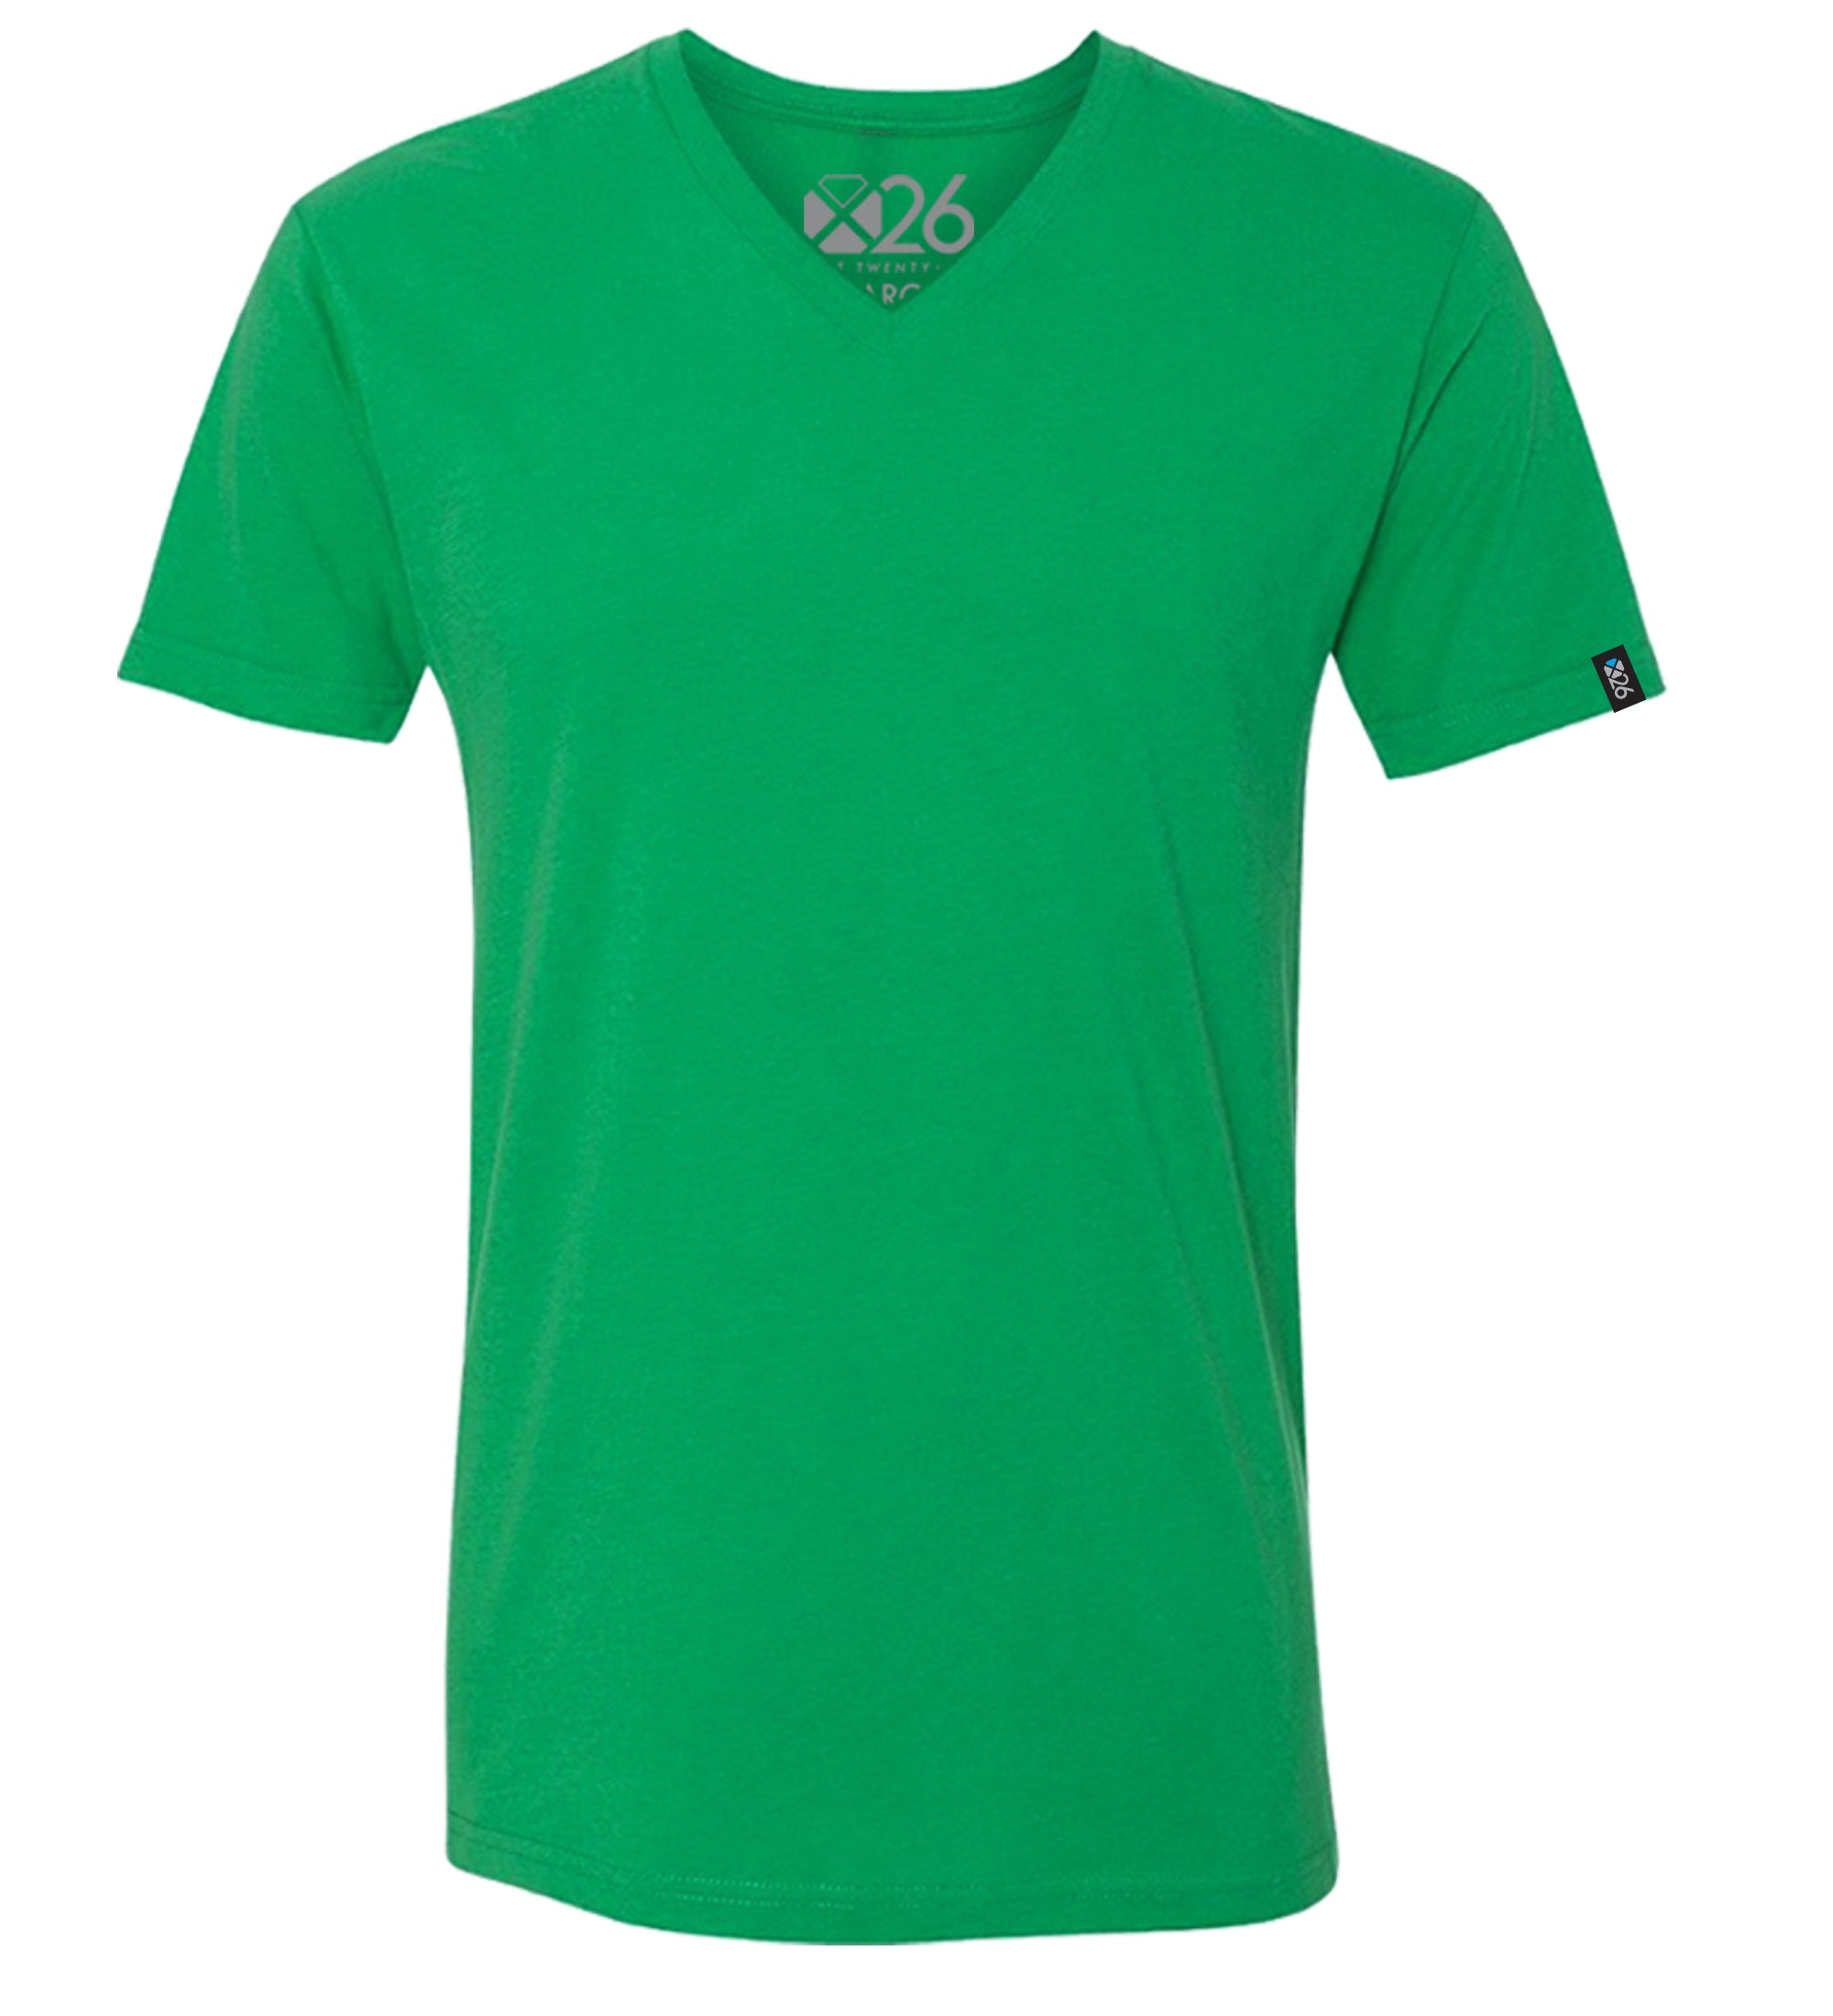 Premium Ultra Soft Sueded Jersey V Neck T-Shirts